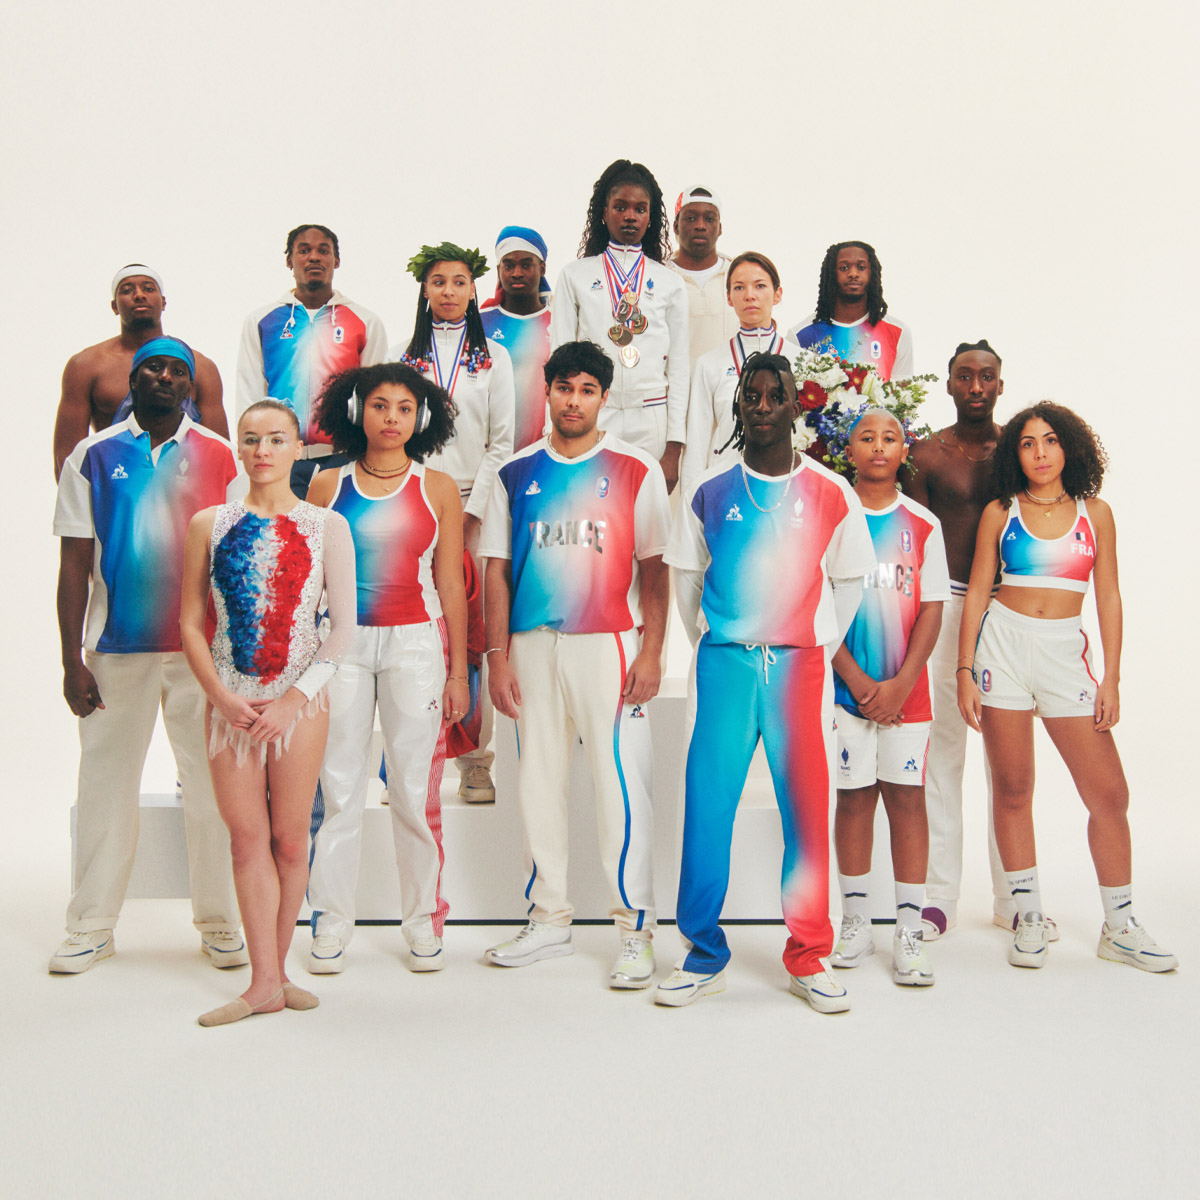 Competition outfits for the French Olympic team in Paris 2024 by Le Coq Sportif and Stéphane Ashpool